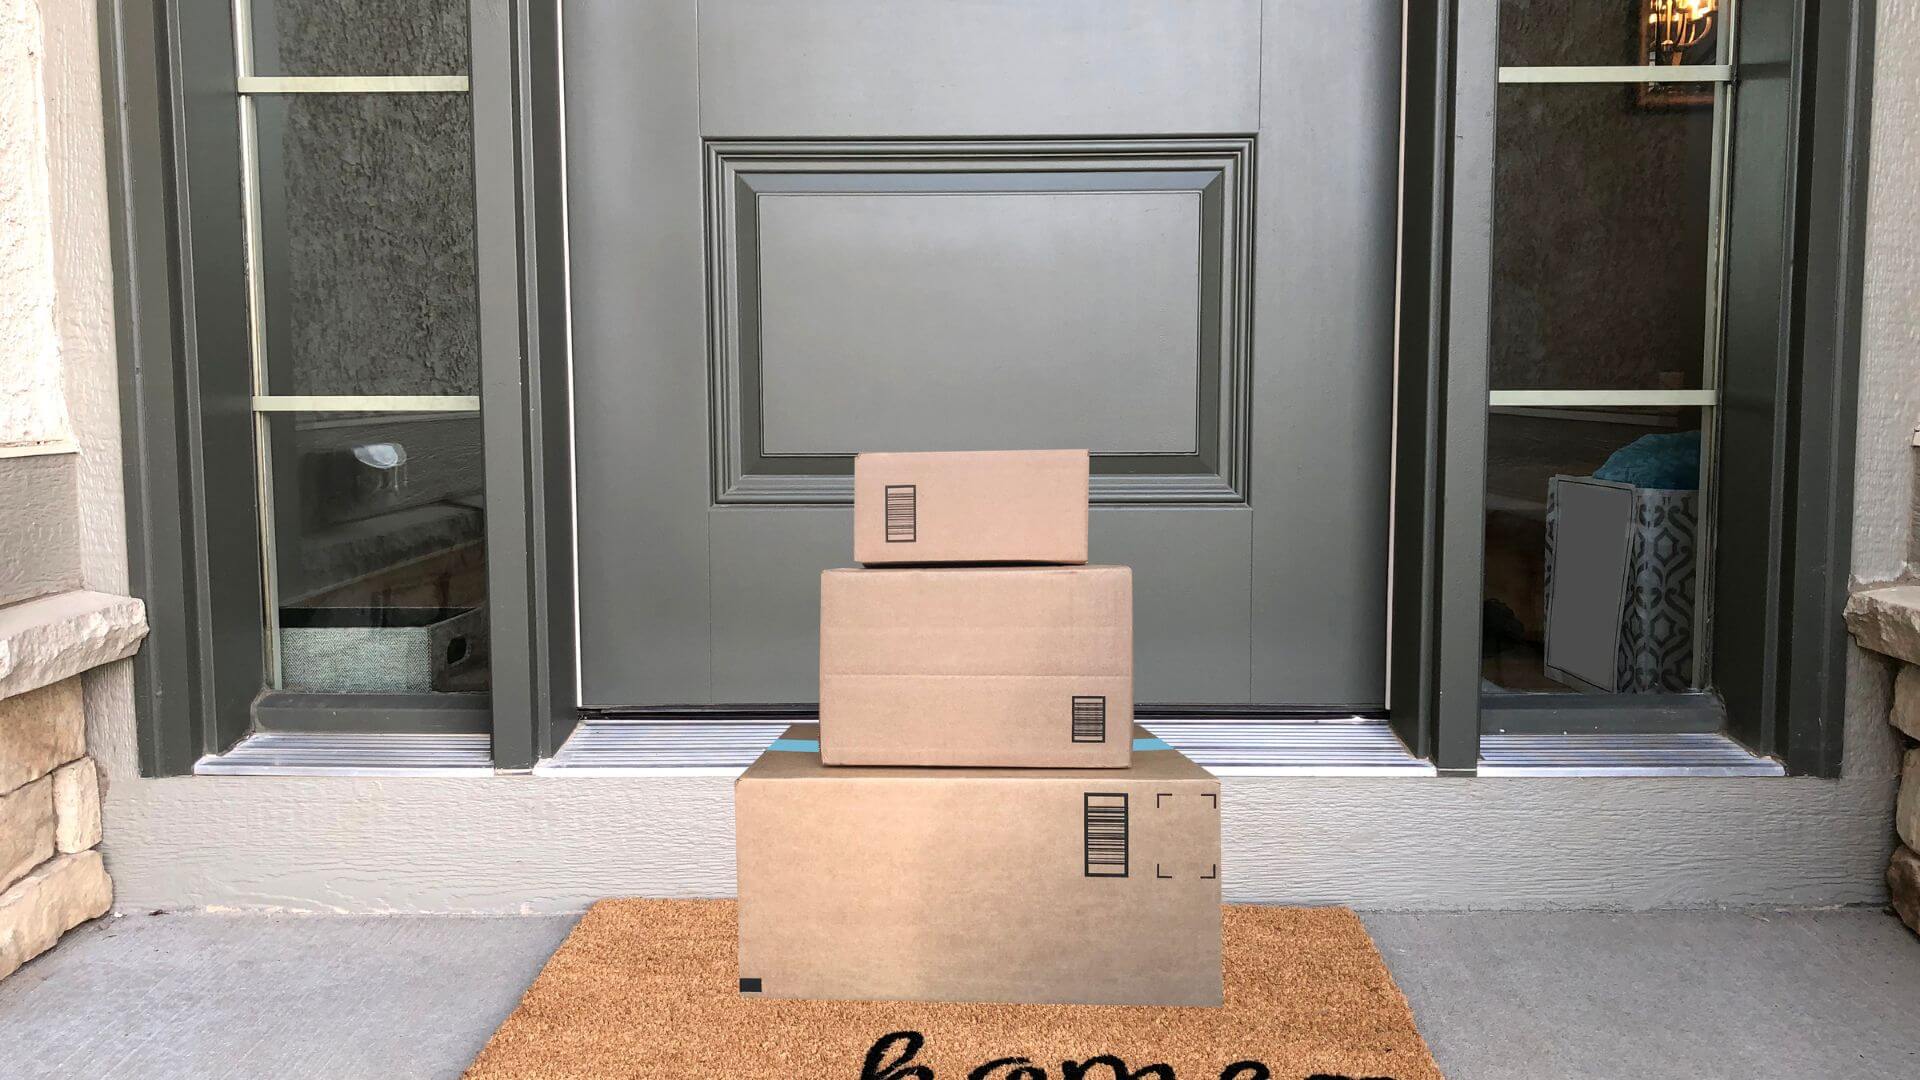 How to Protect Your Mail from Porch Pirates